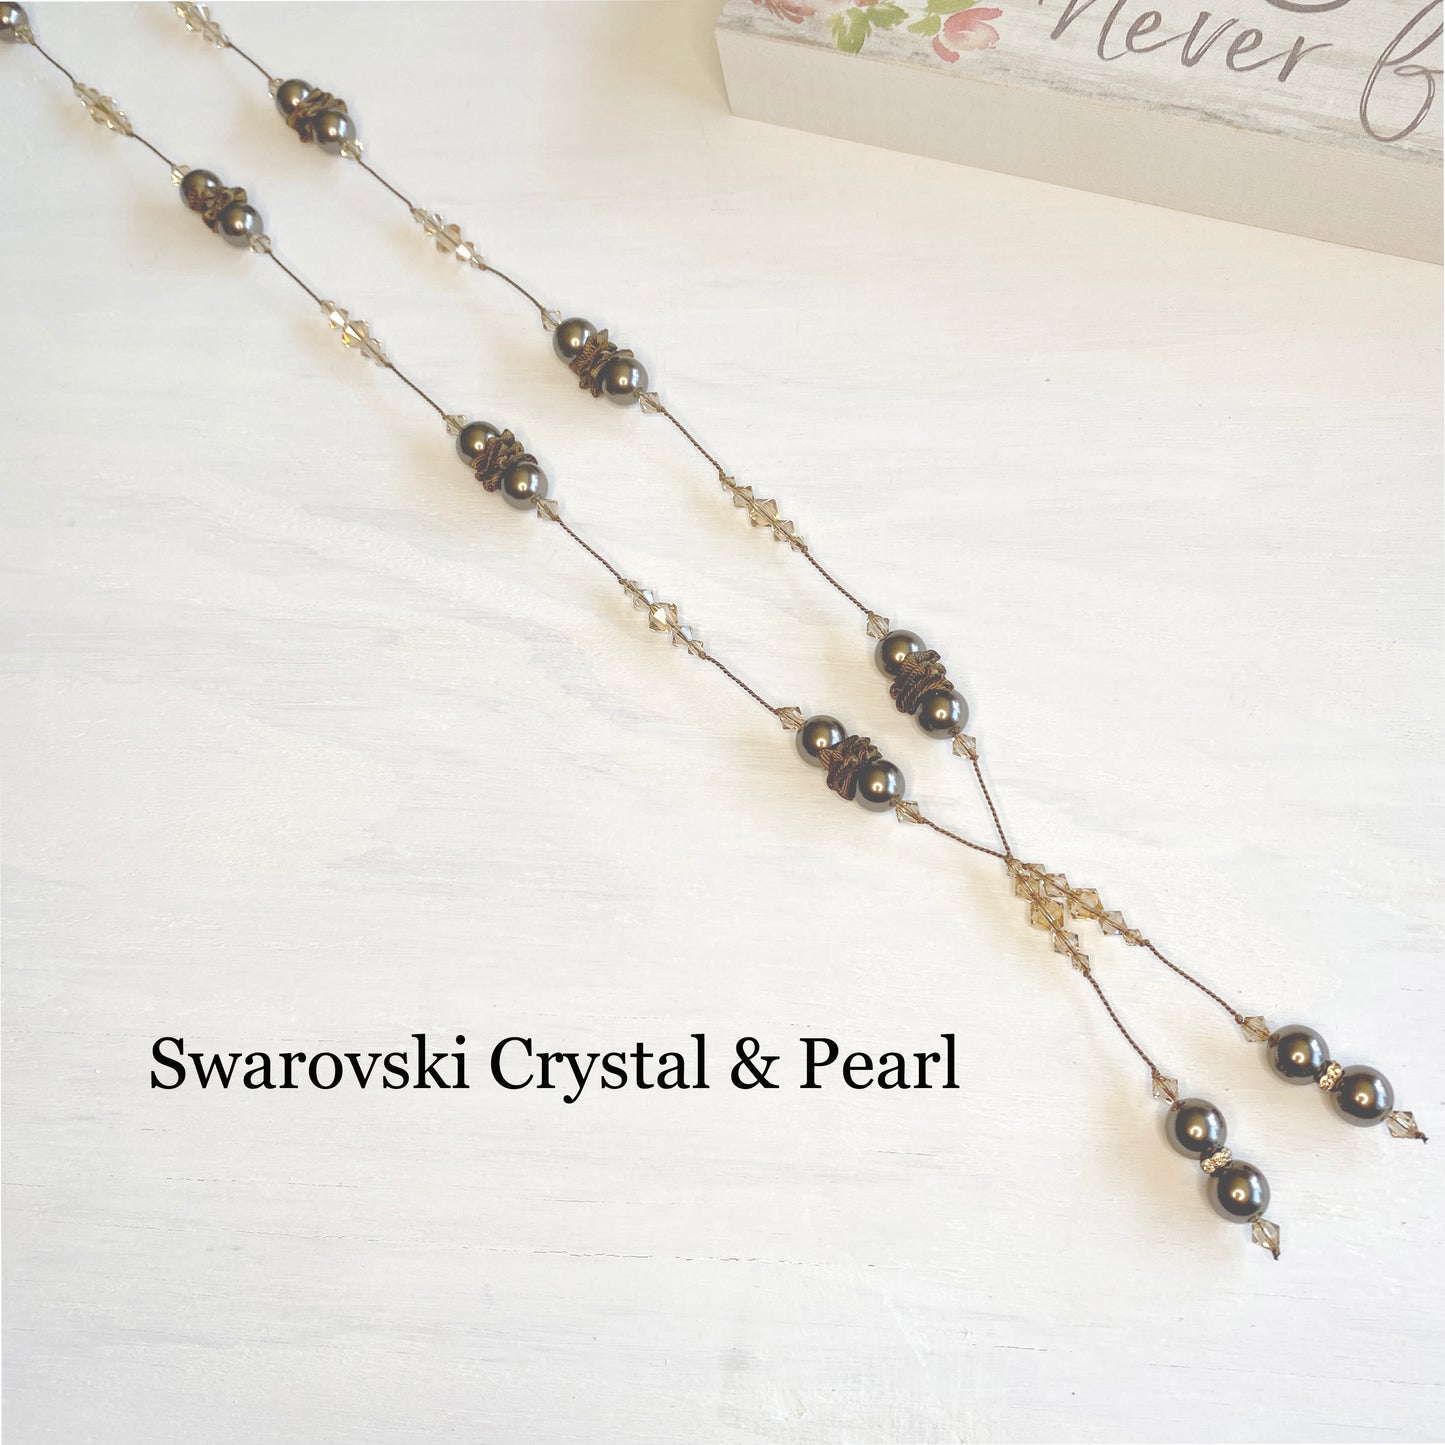 Handmade Swarovski Crystal and Pearl Adjustable  Necklace, Made with Brown Pearls, and Light Colorado Topes Crystals